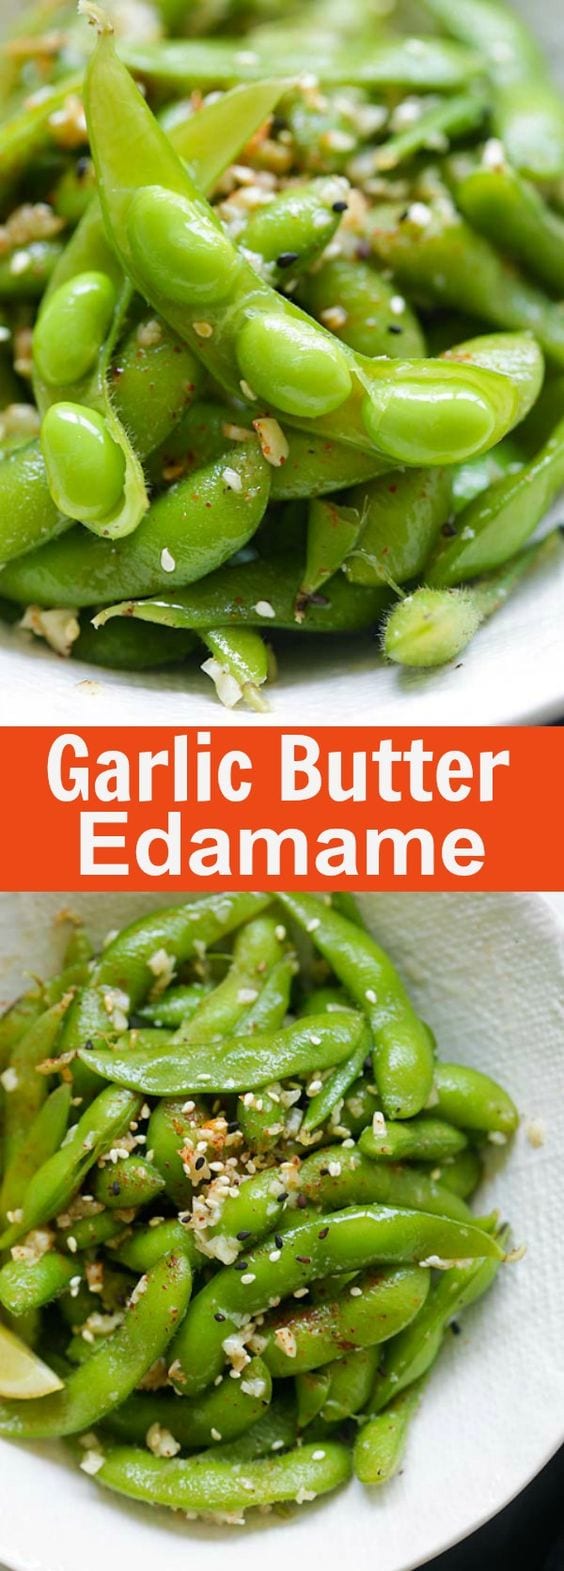 Garlic Butter Edamame – healthy edamame coated with garlicky and buttery goodness. The easiest appetizer you can whip up in 10 mins | rasamalaysia.com